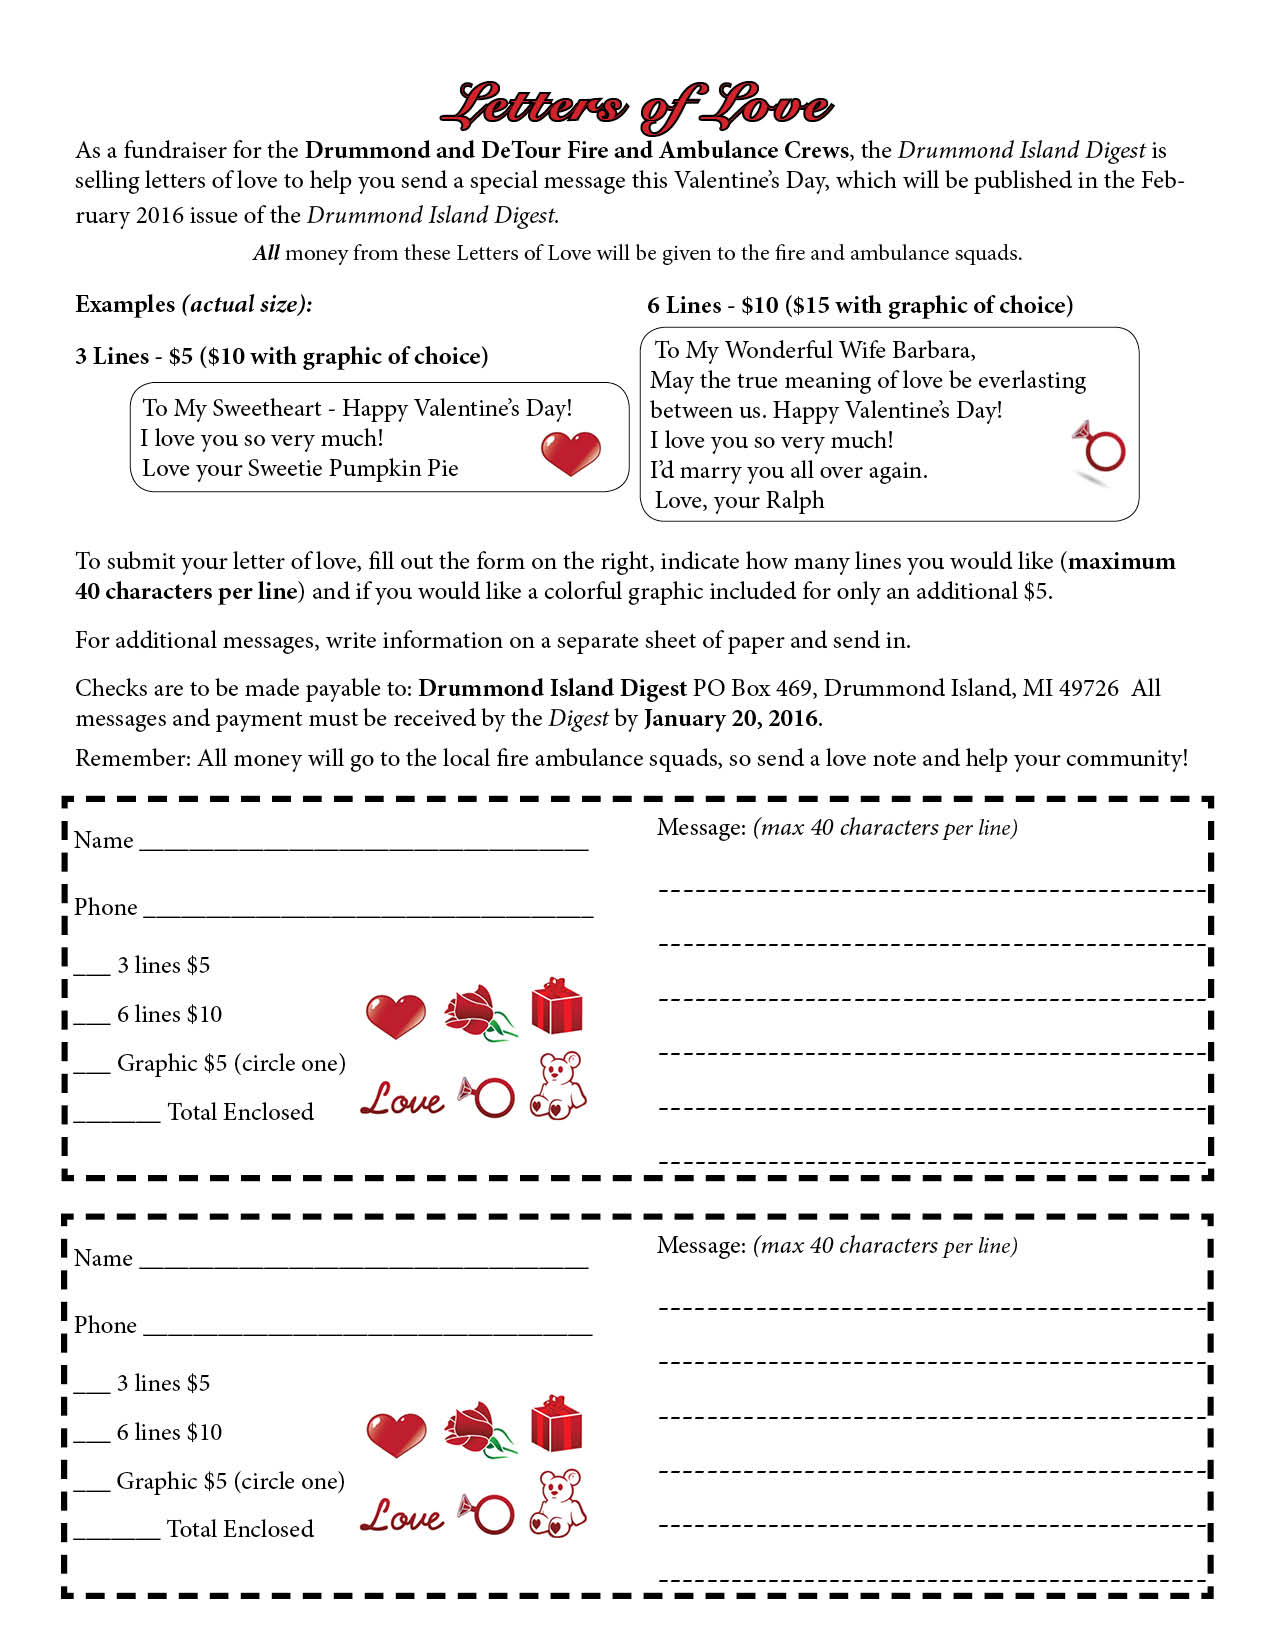 Form for sending in a Letter of Love to appear in the February 2016 issue.